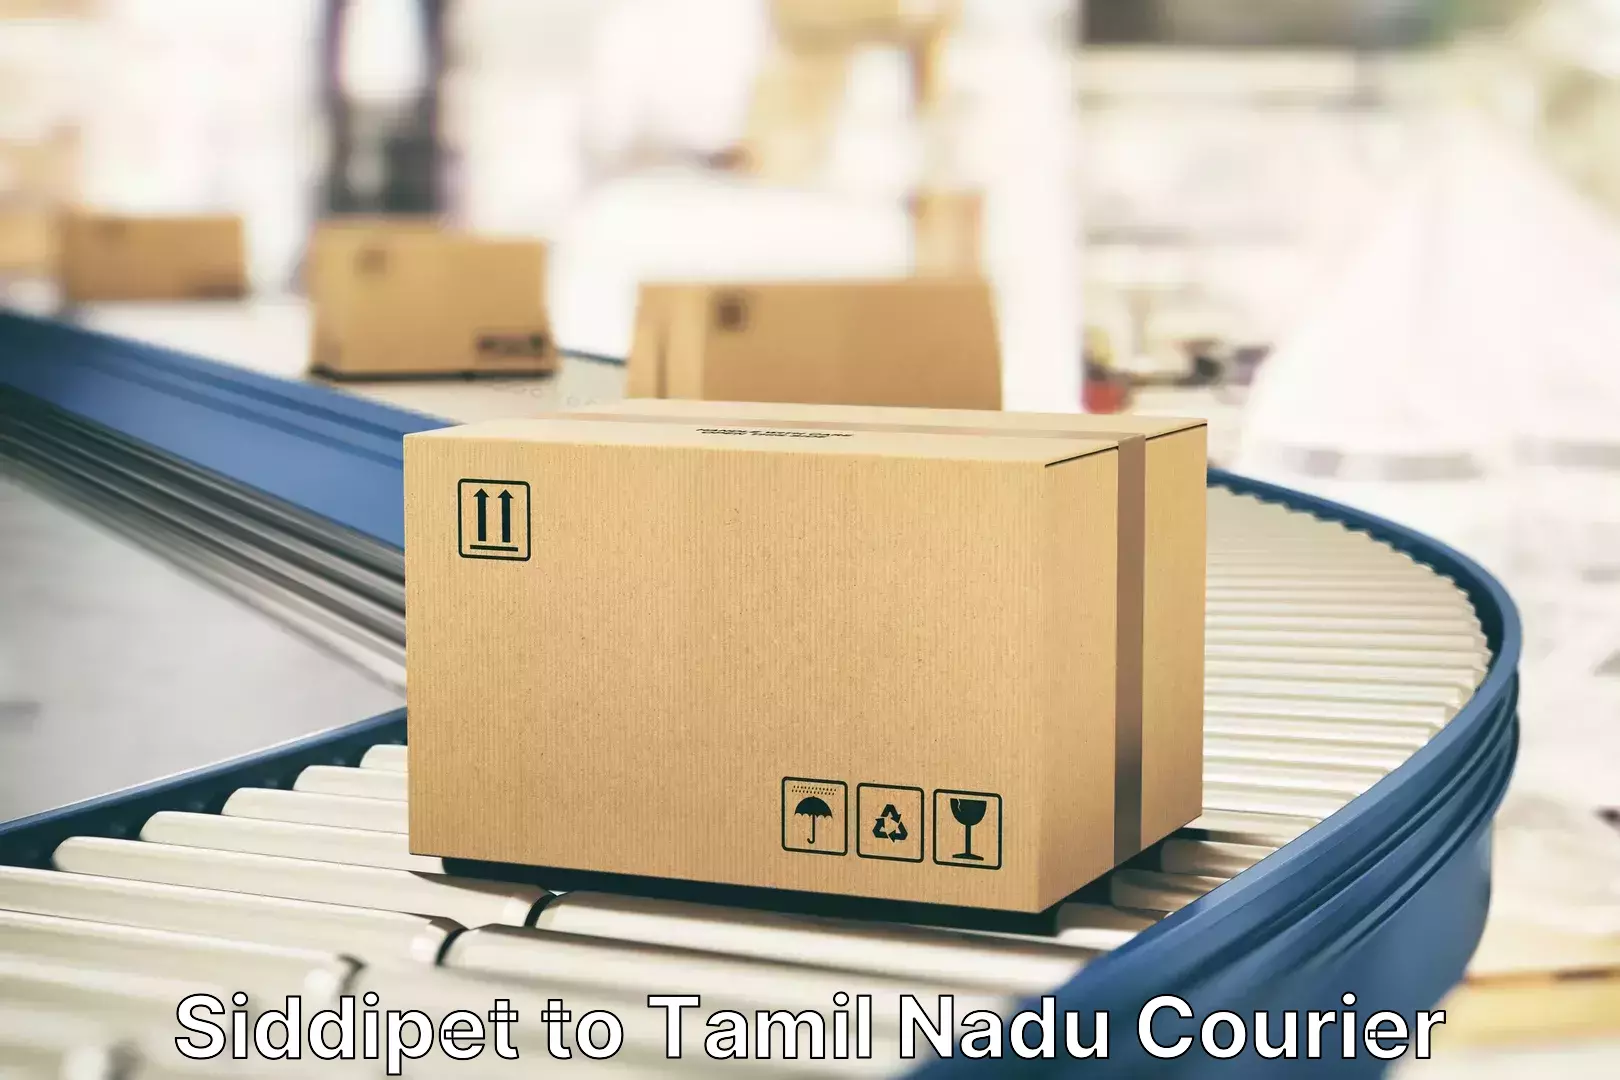 Luggage shipment specialists Siddipet to Theni